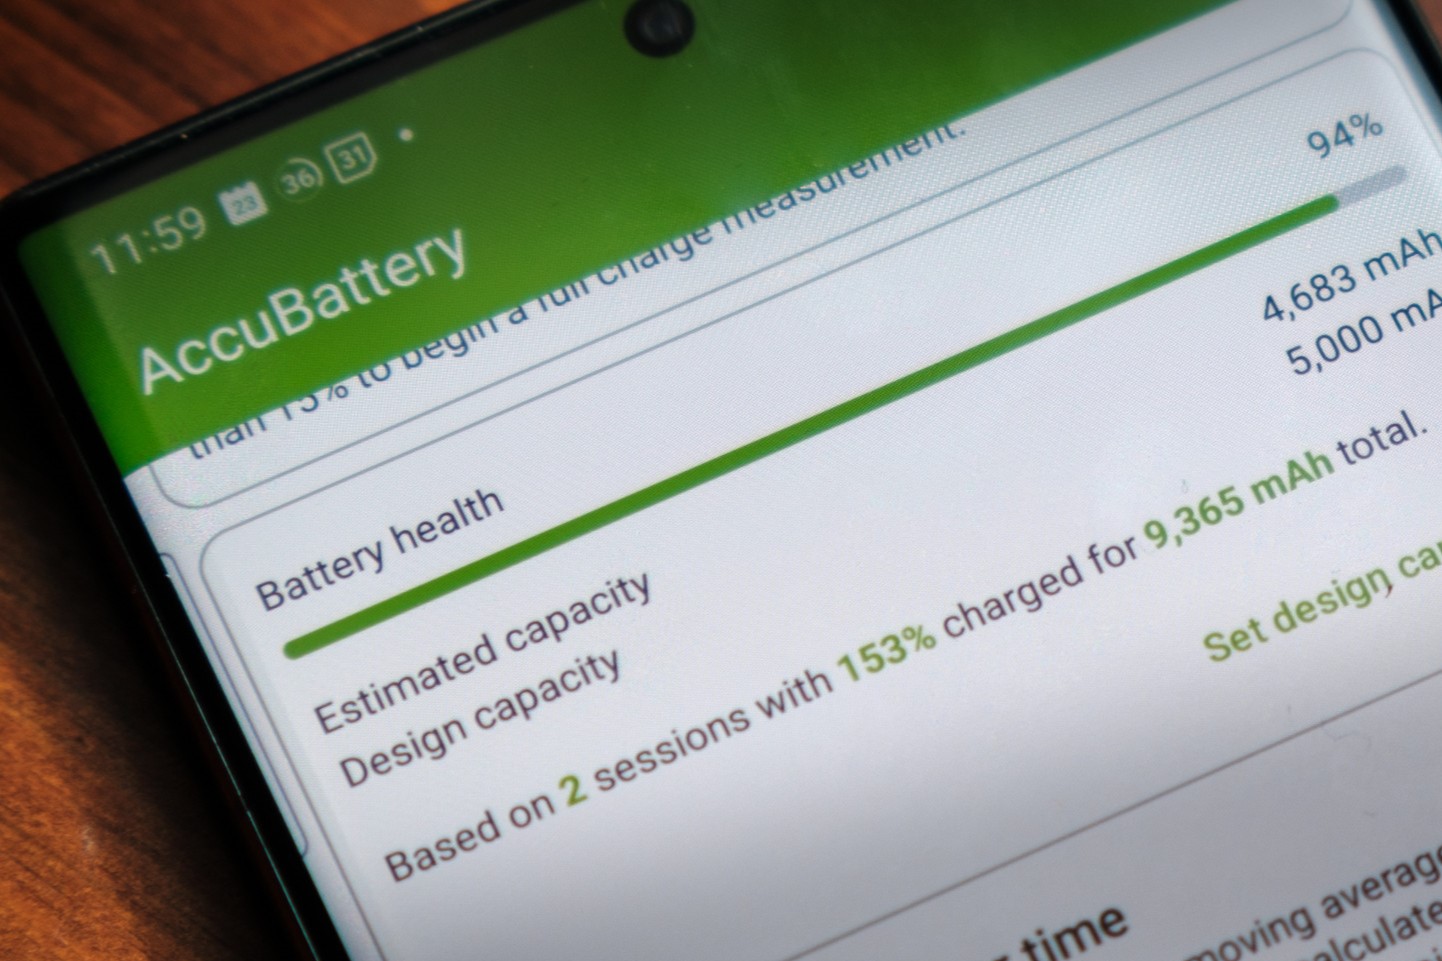 Checking Battery Health On Xiaomi: Step-by-Step Tutorial